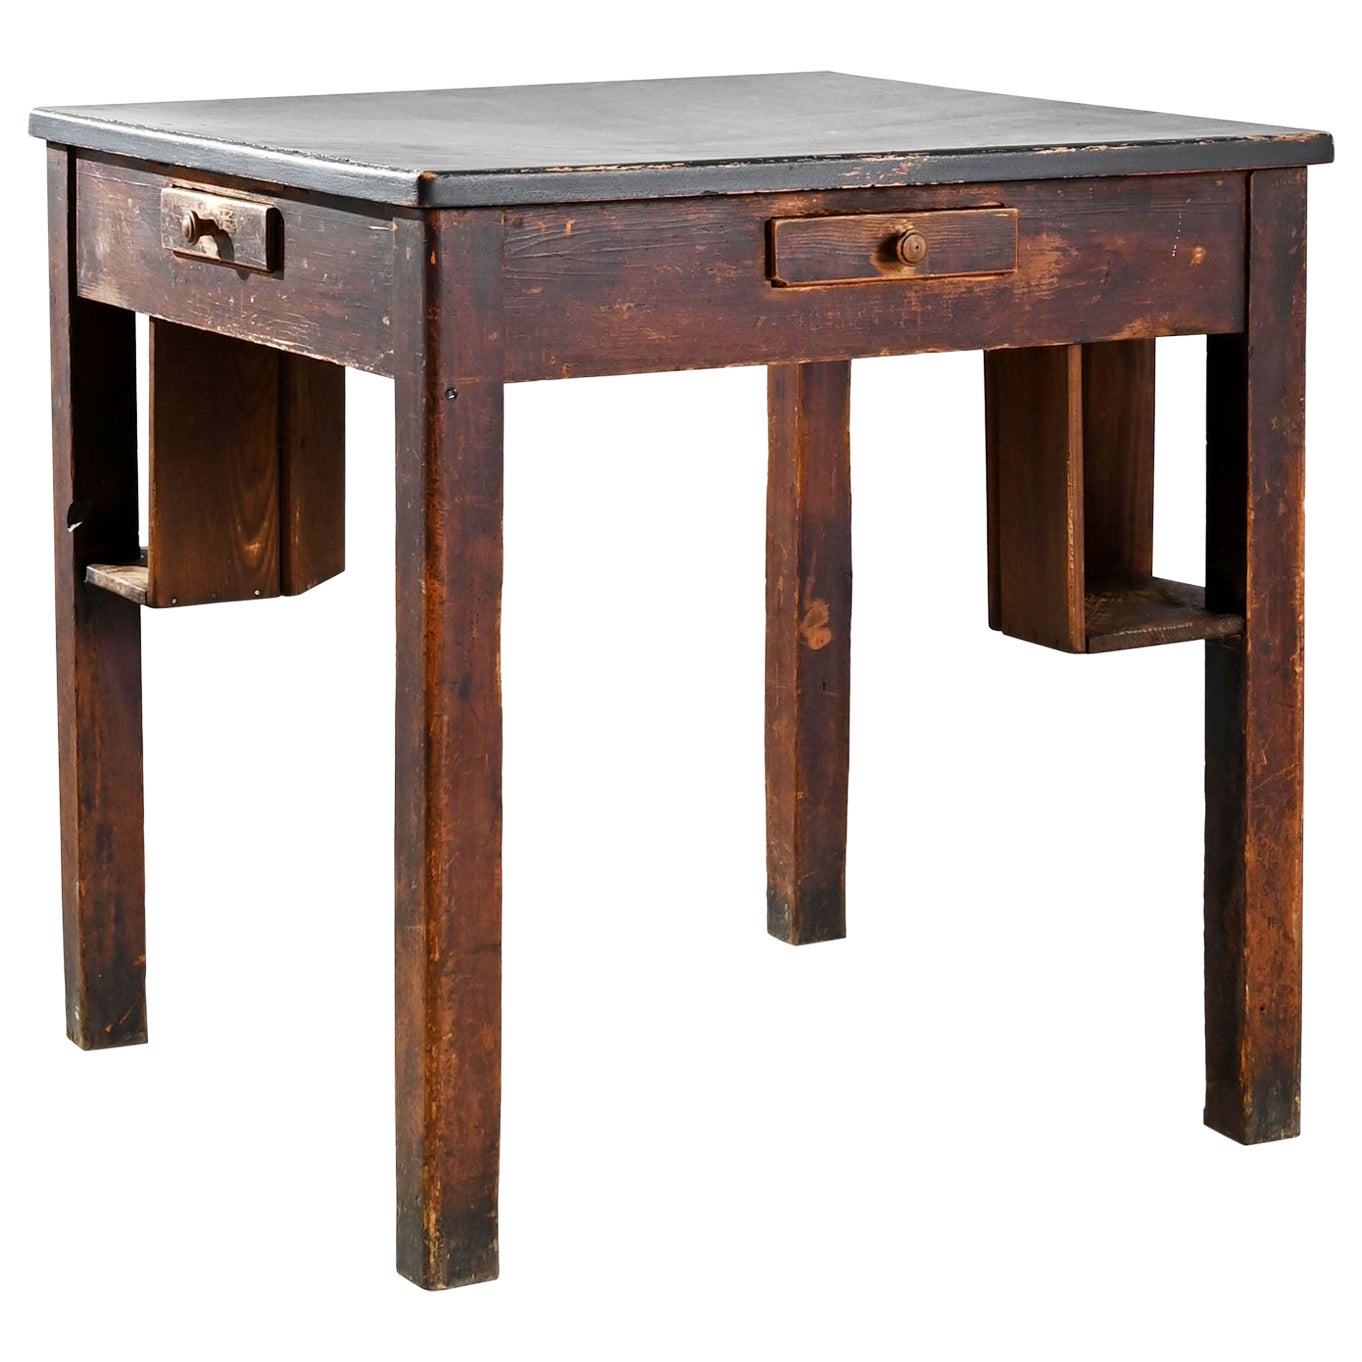 Early 20th Century, Central European Wooden Table